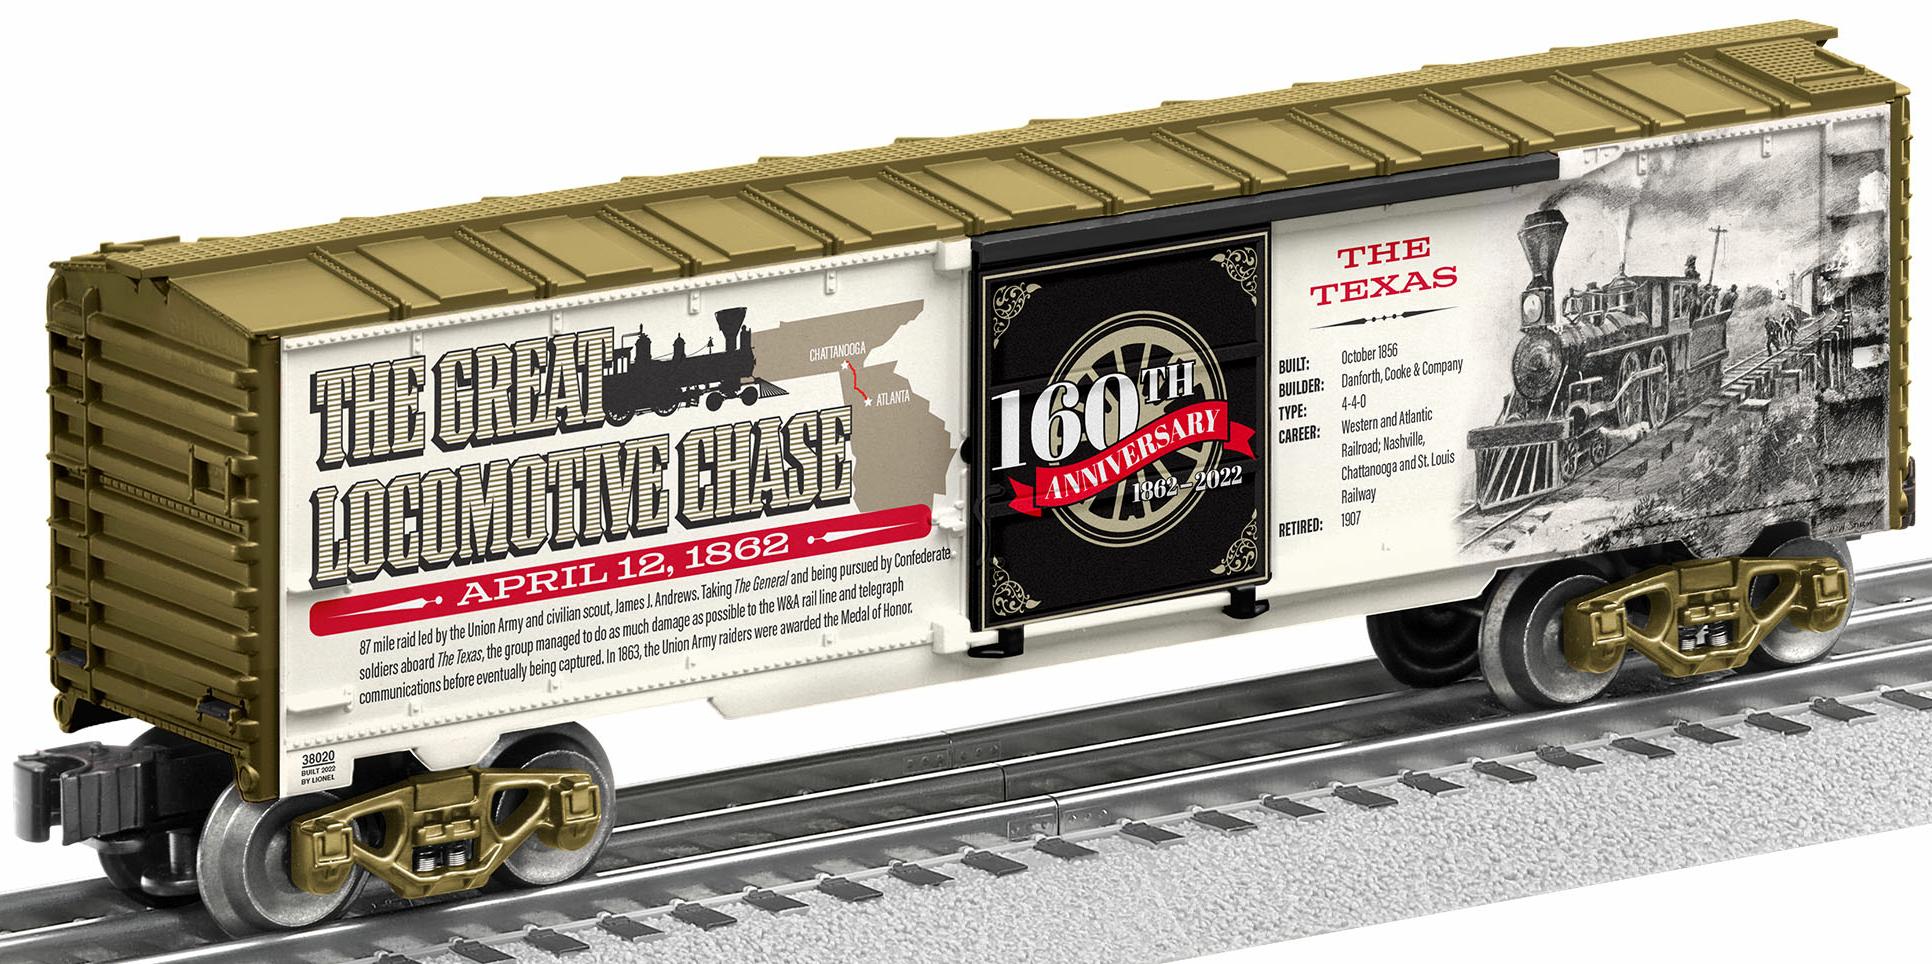 The Great Locomotive Chase 160th Anniversary Boxcar image